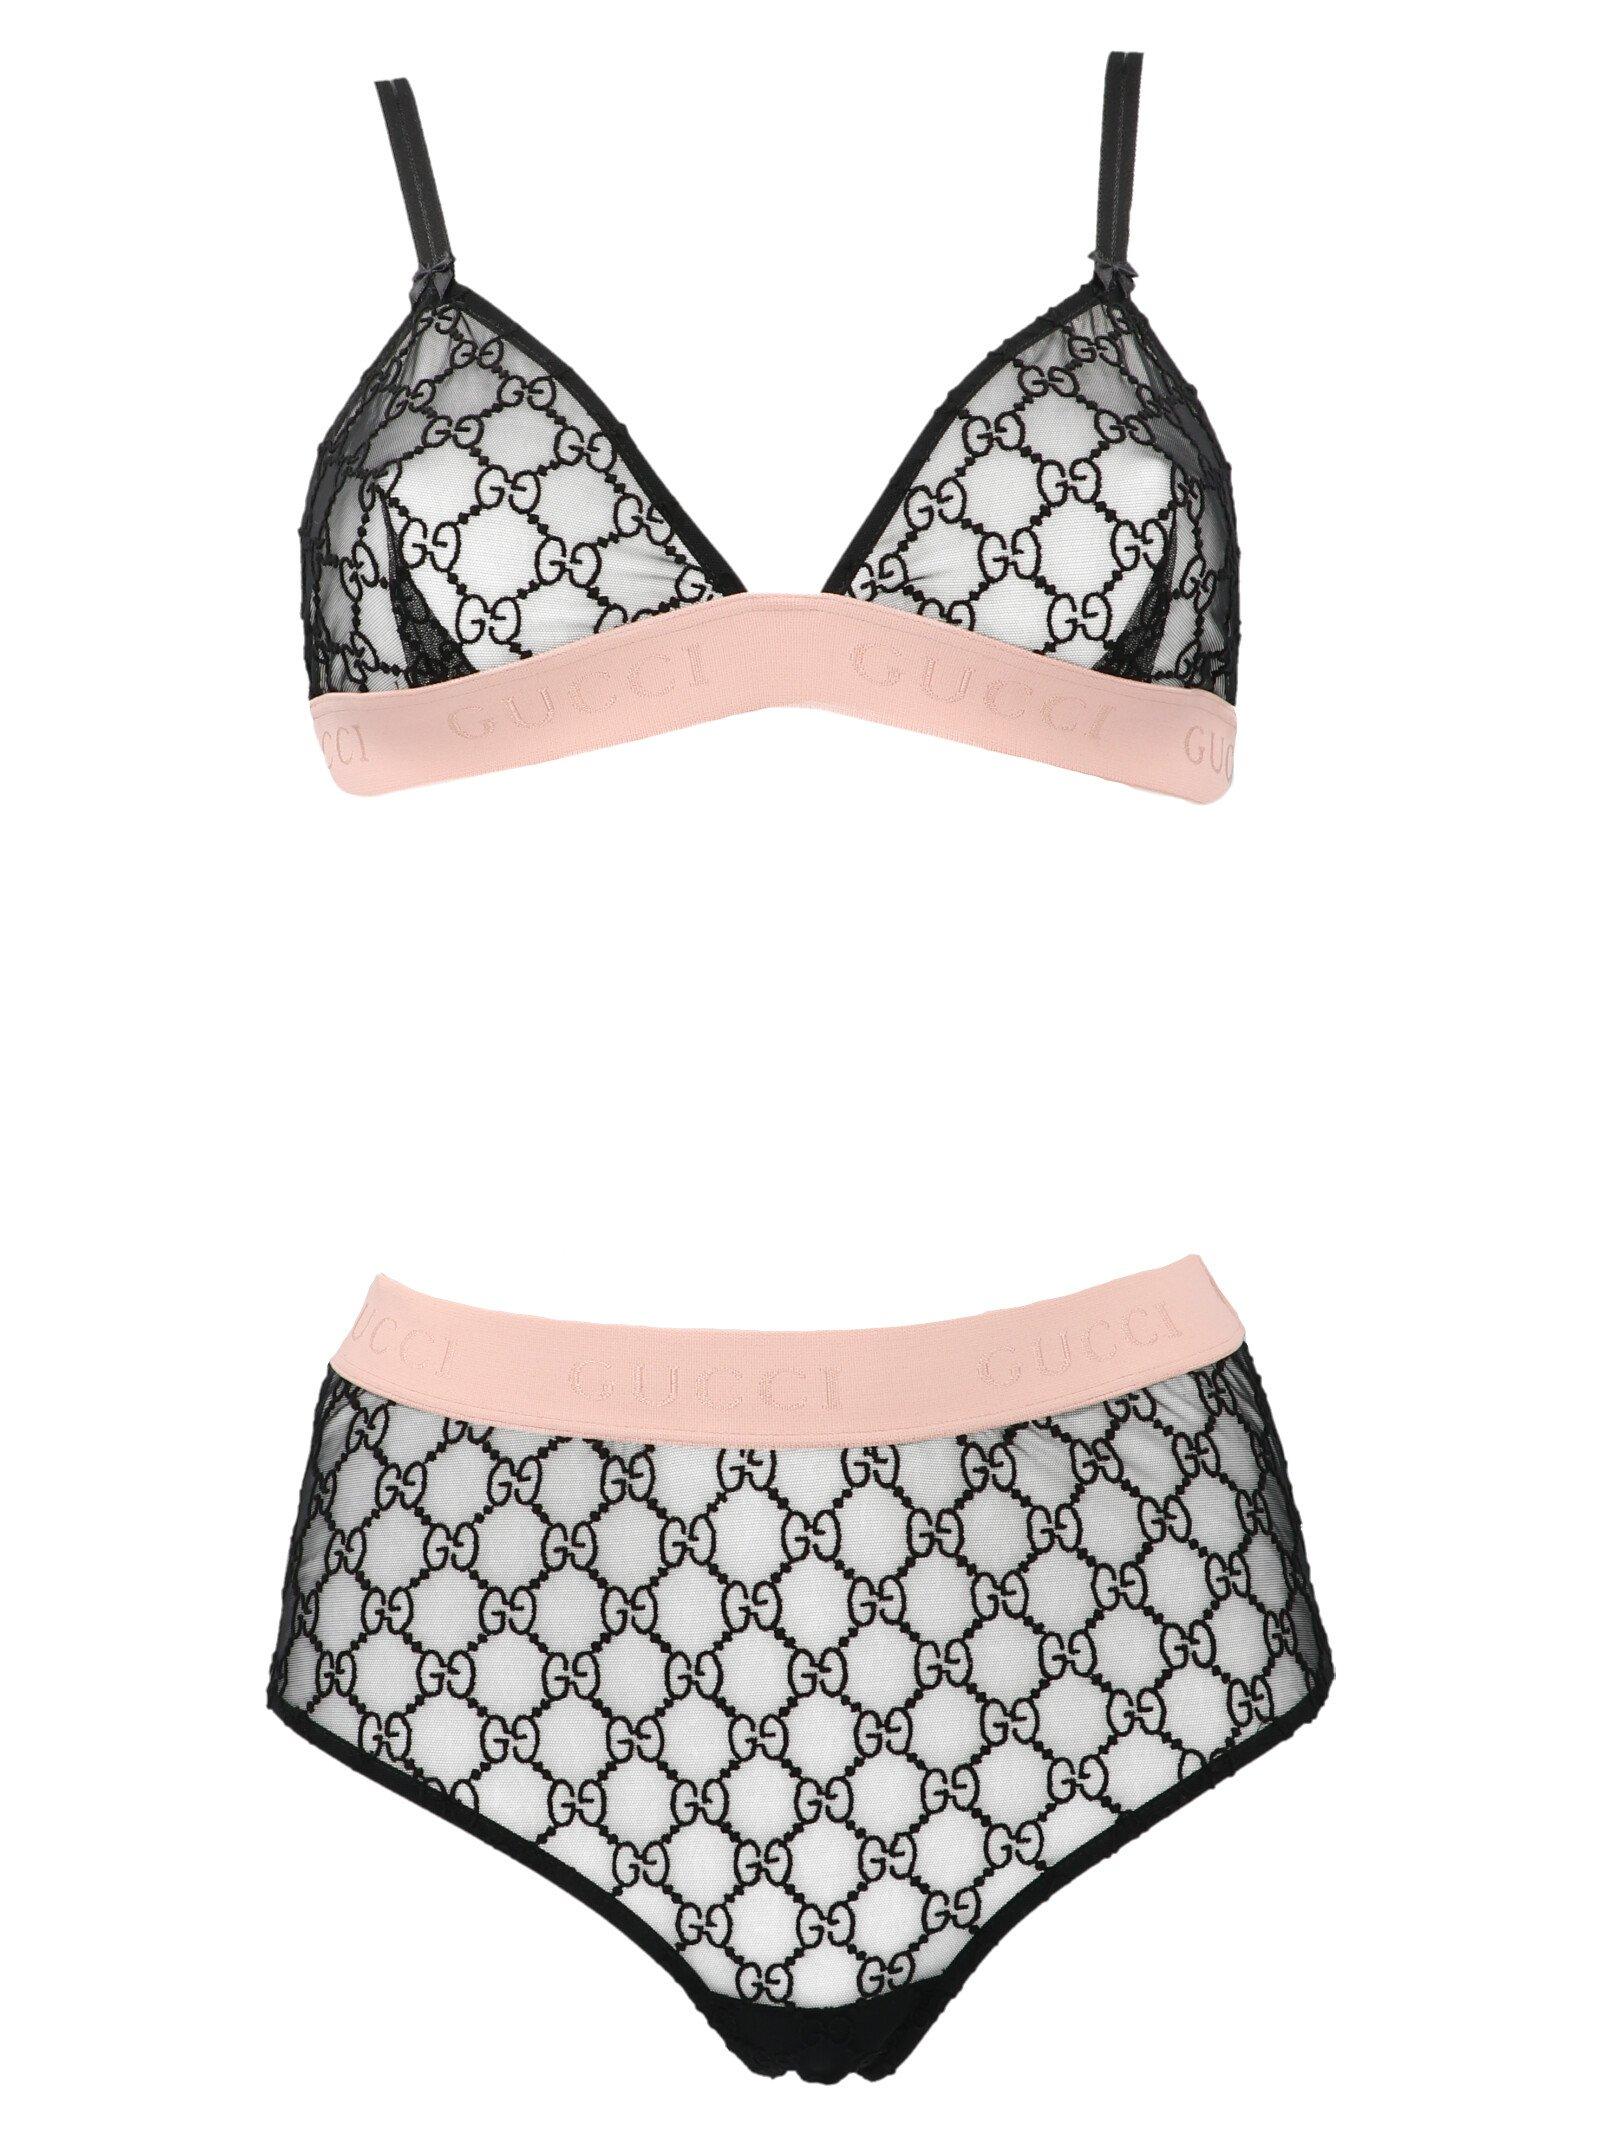 Gucci Synthetic Monogram Mesh Lingerie Set in Black - Save 44% - Lyst